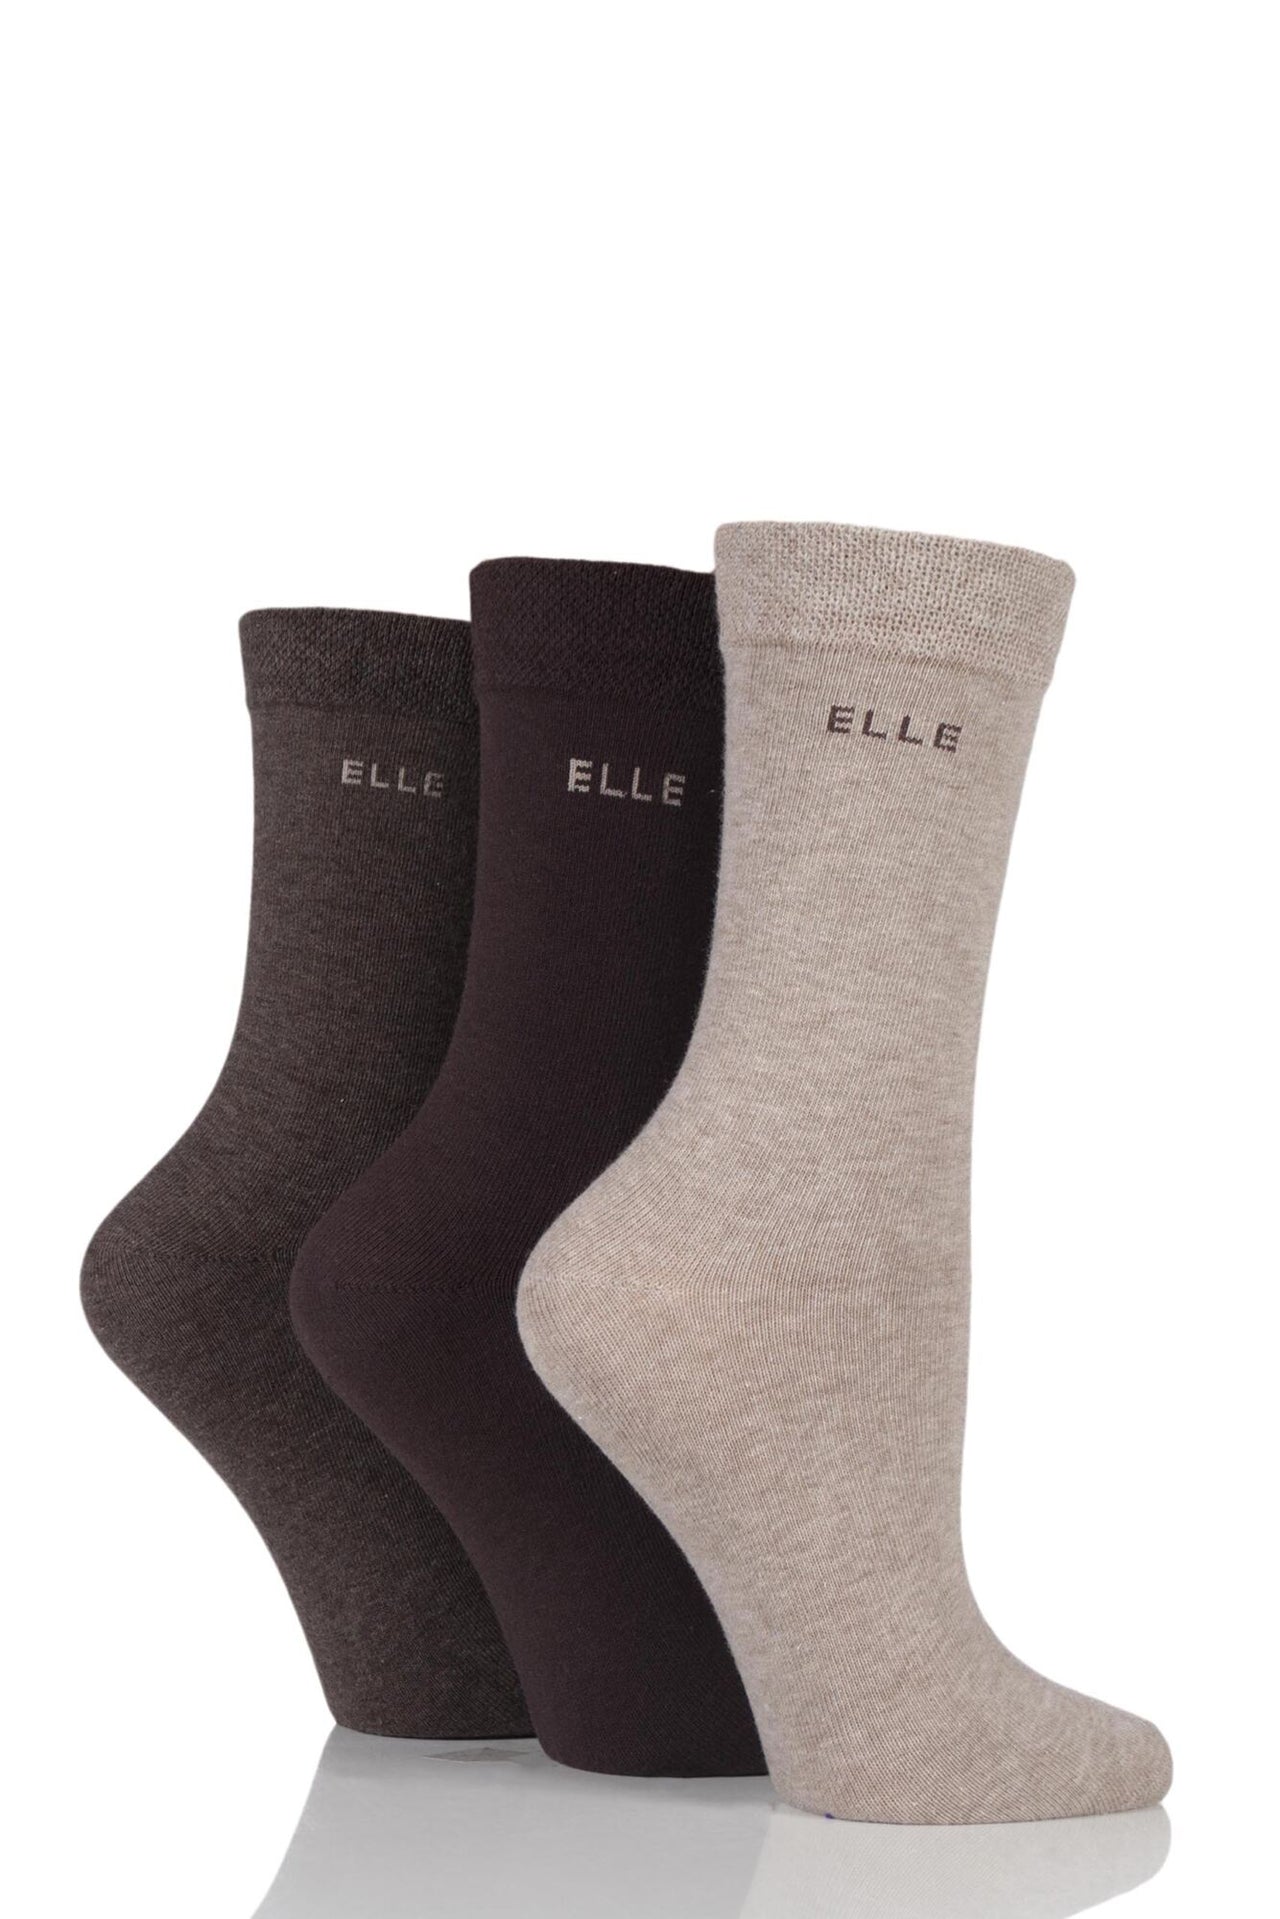 Elle 3 Pairs of Combed Cotton Socks - Cocoa